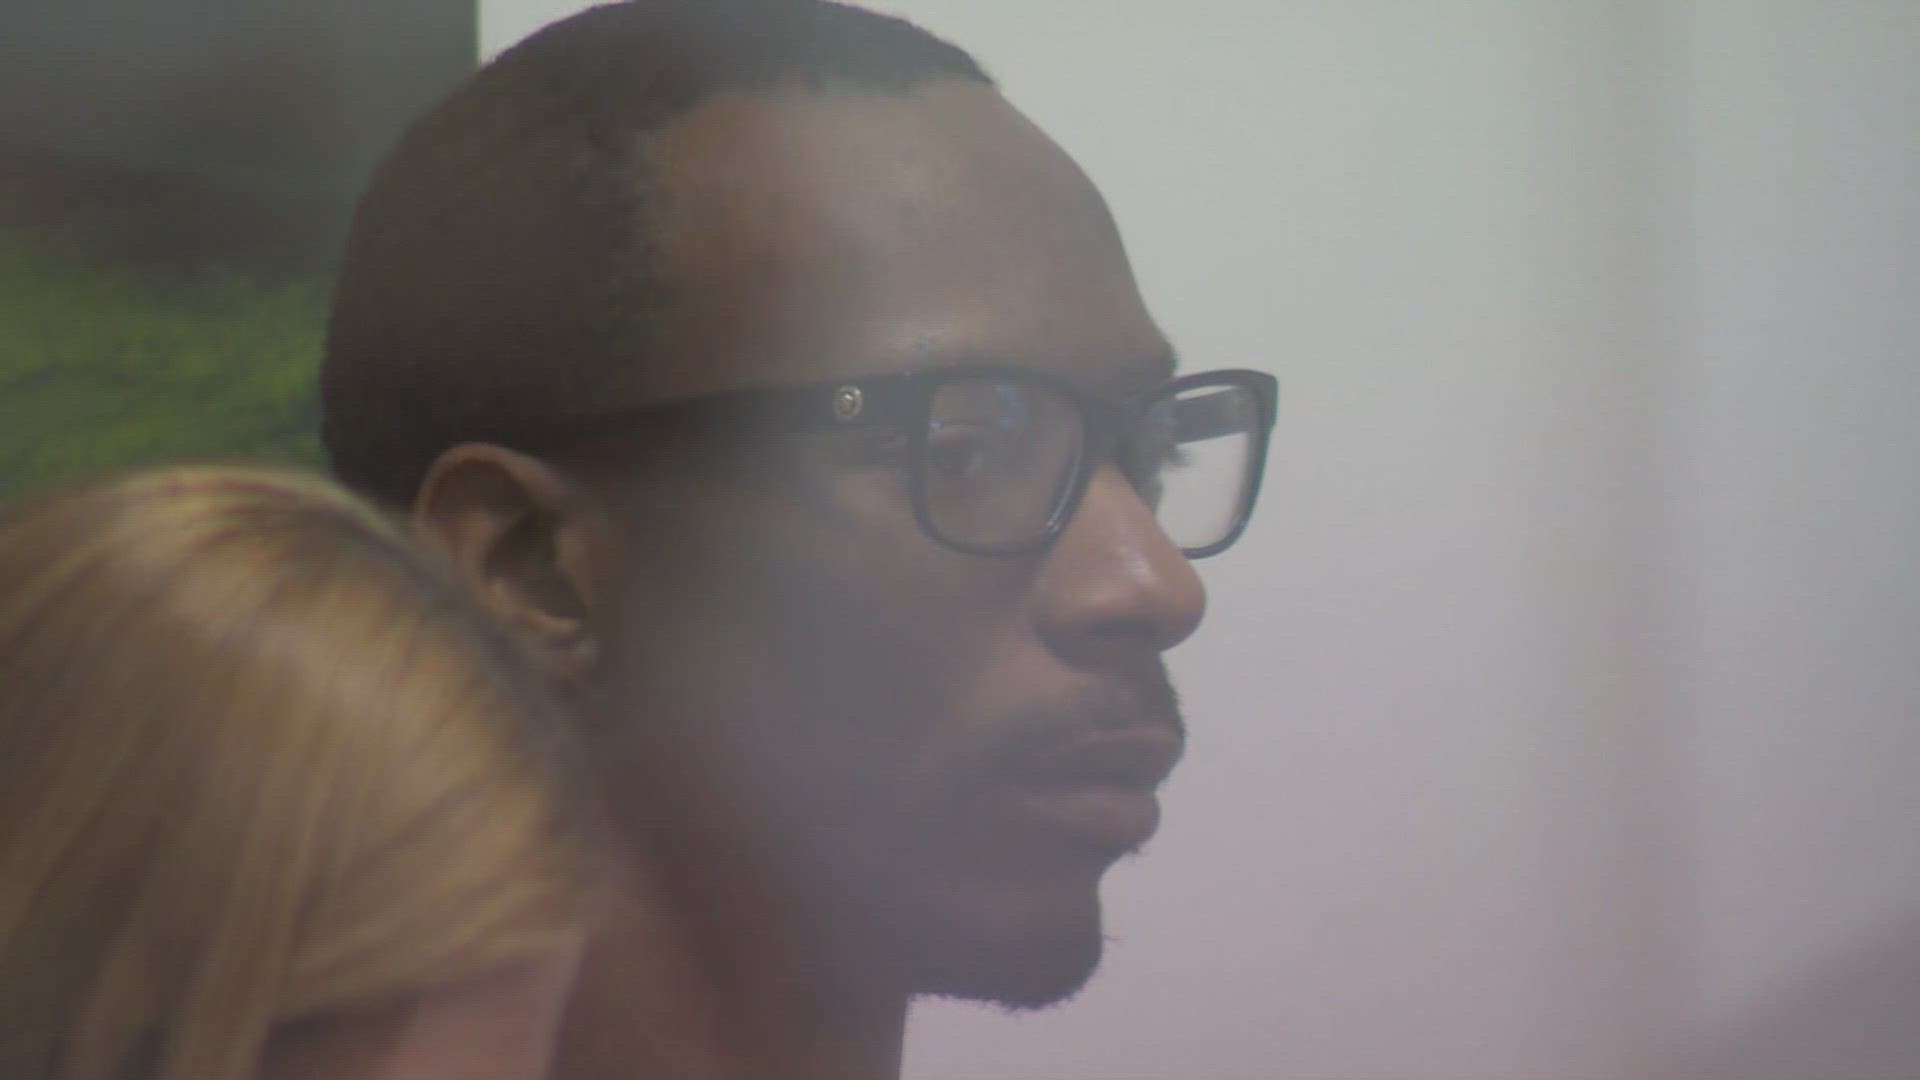 William Tolliver pleaded guilty to manslaughter, assault and unlawful possession charges on Friday.